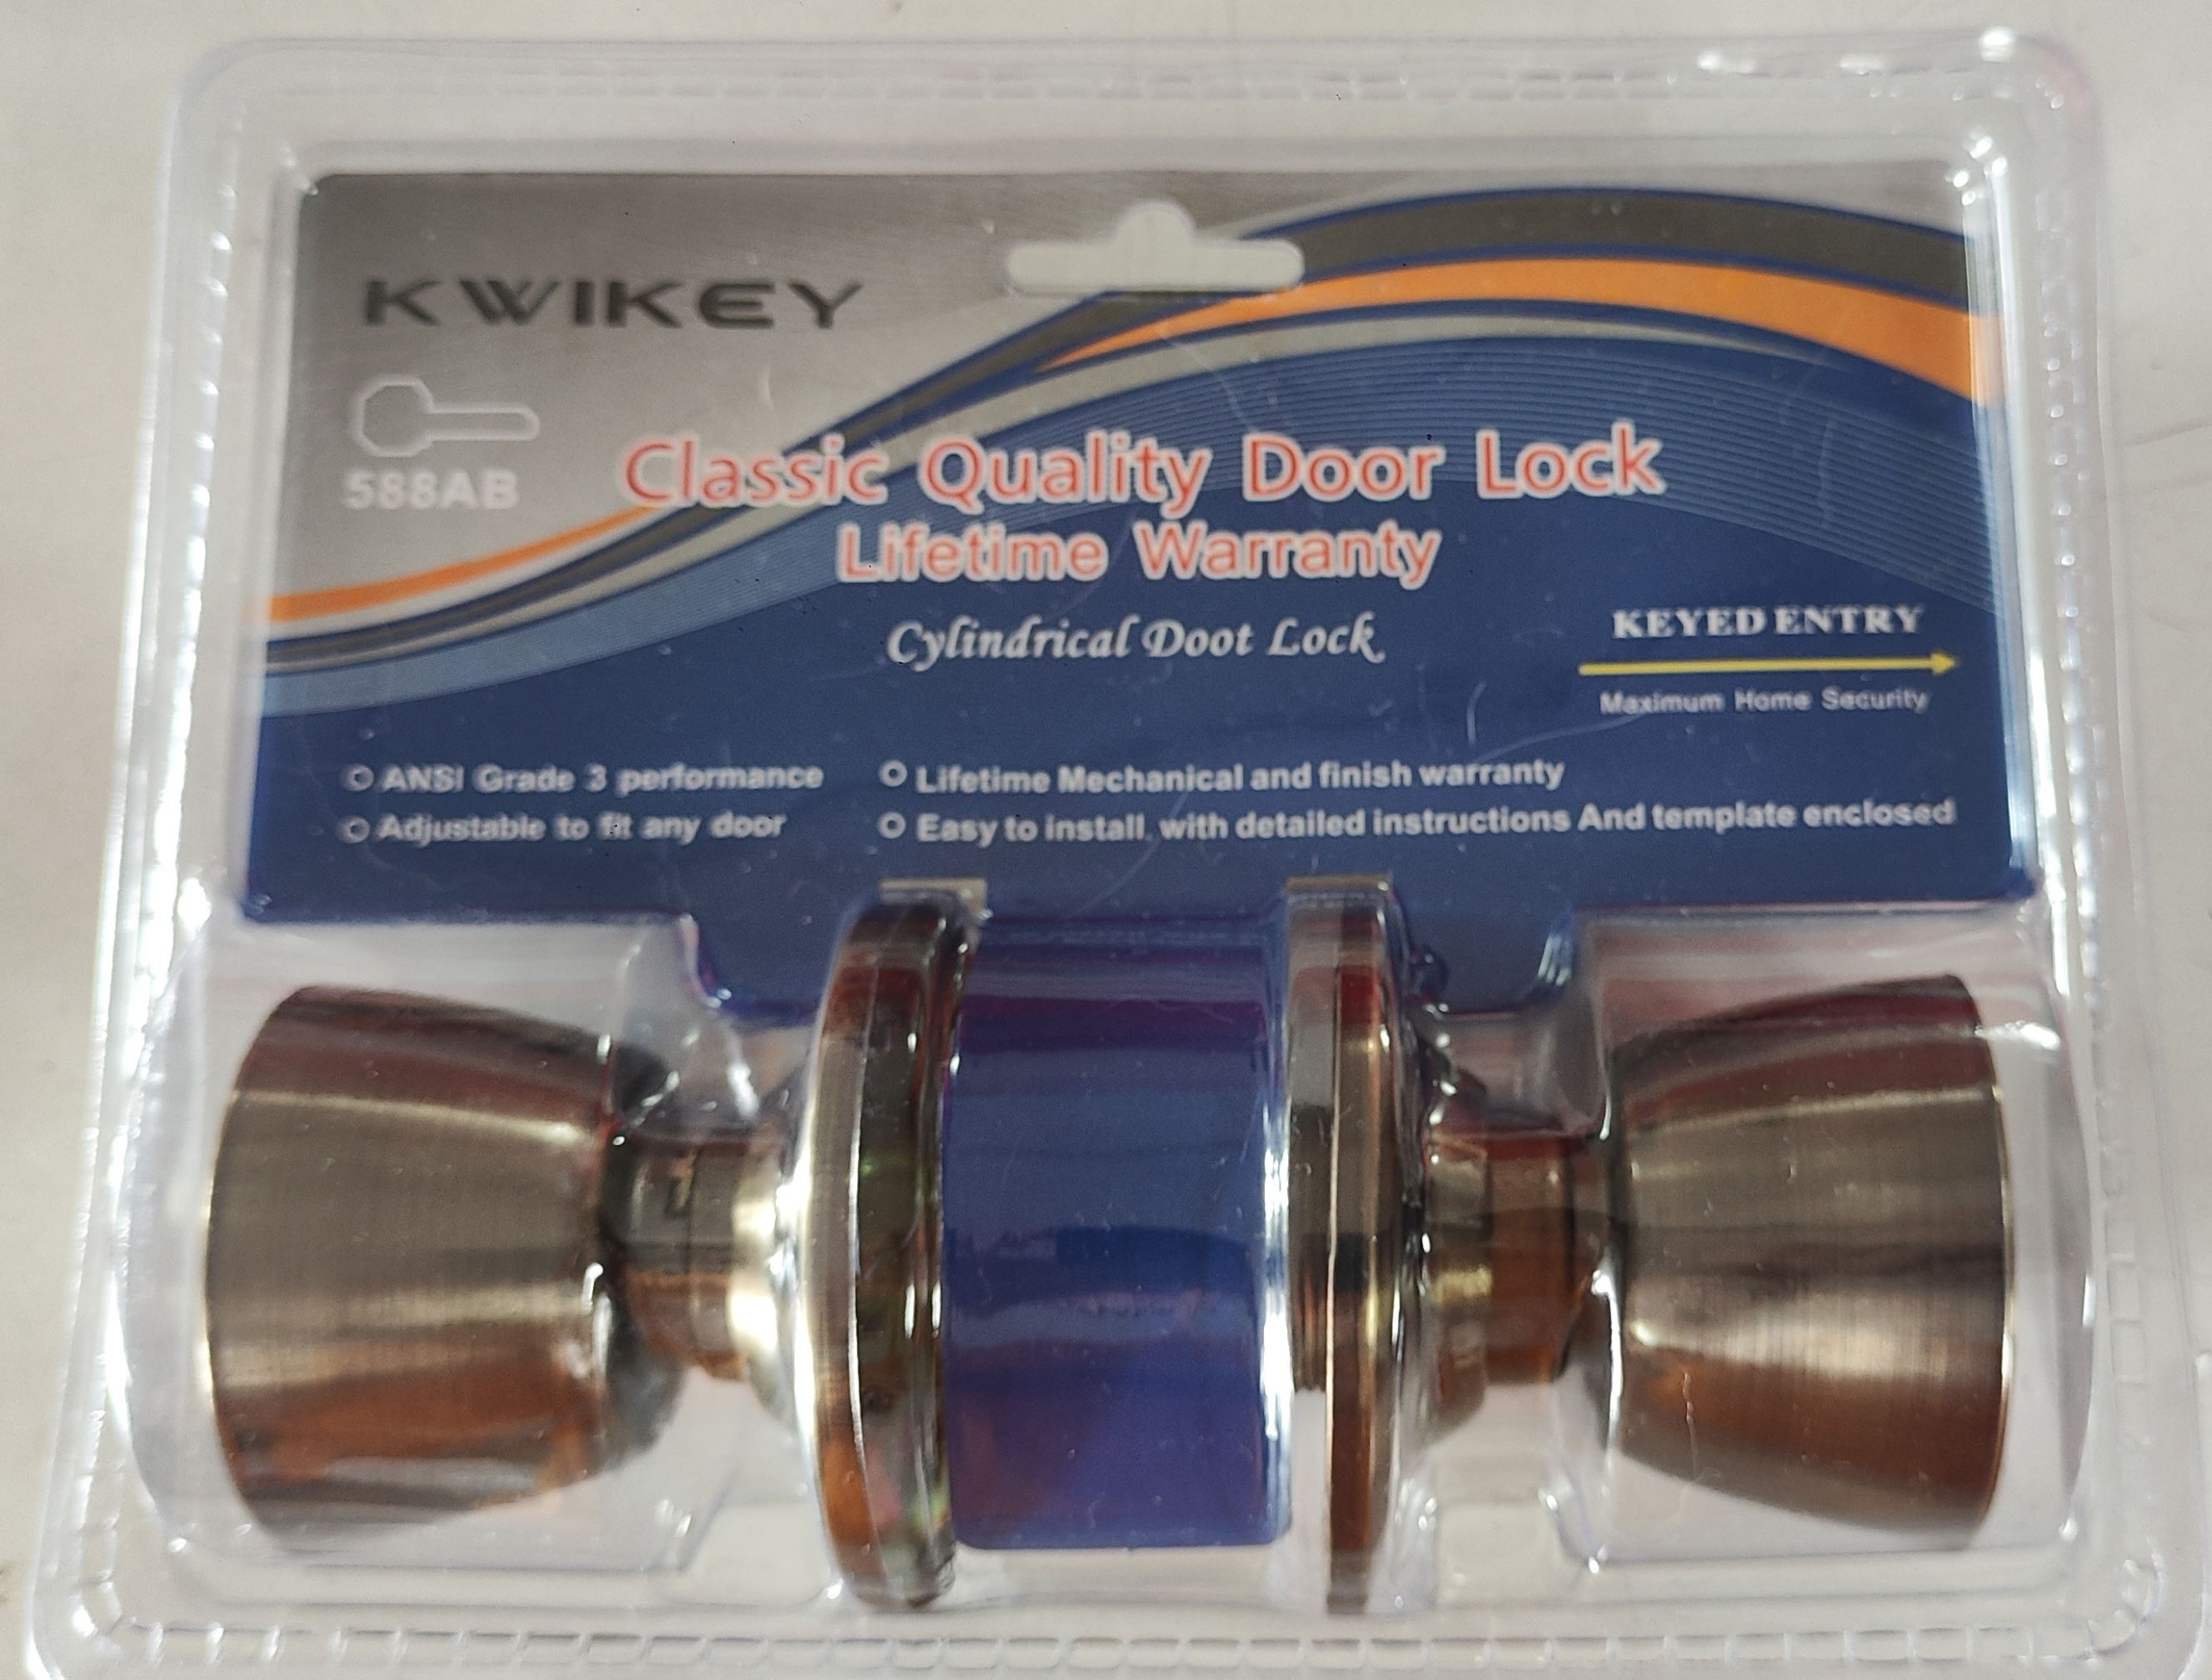 Buy Kwikset Top Products at Best Prices online